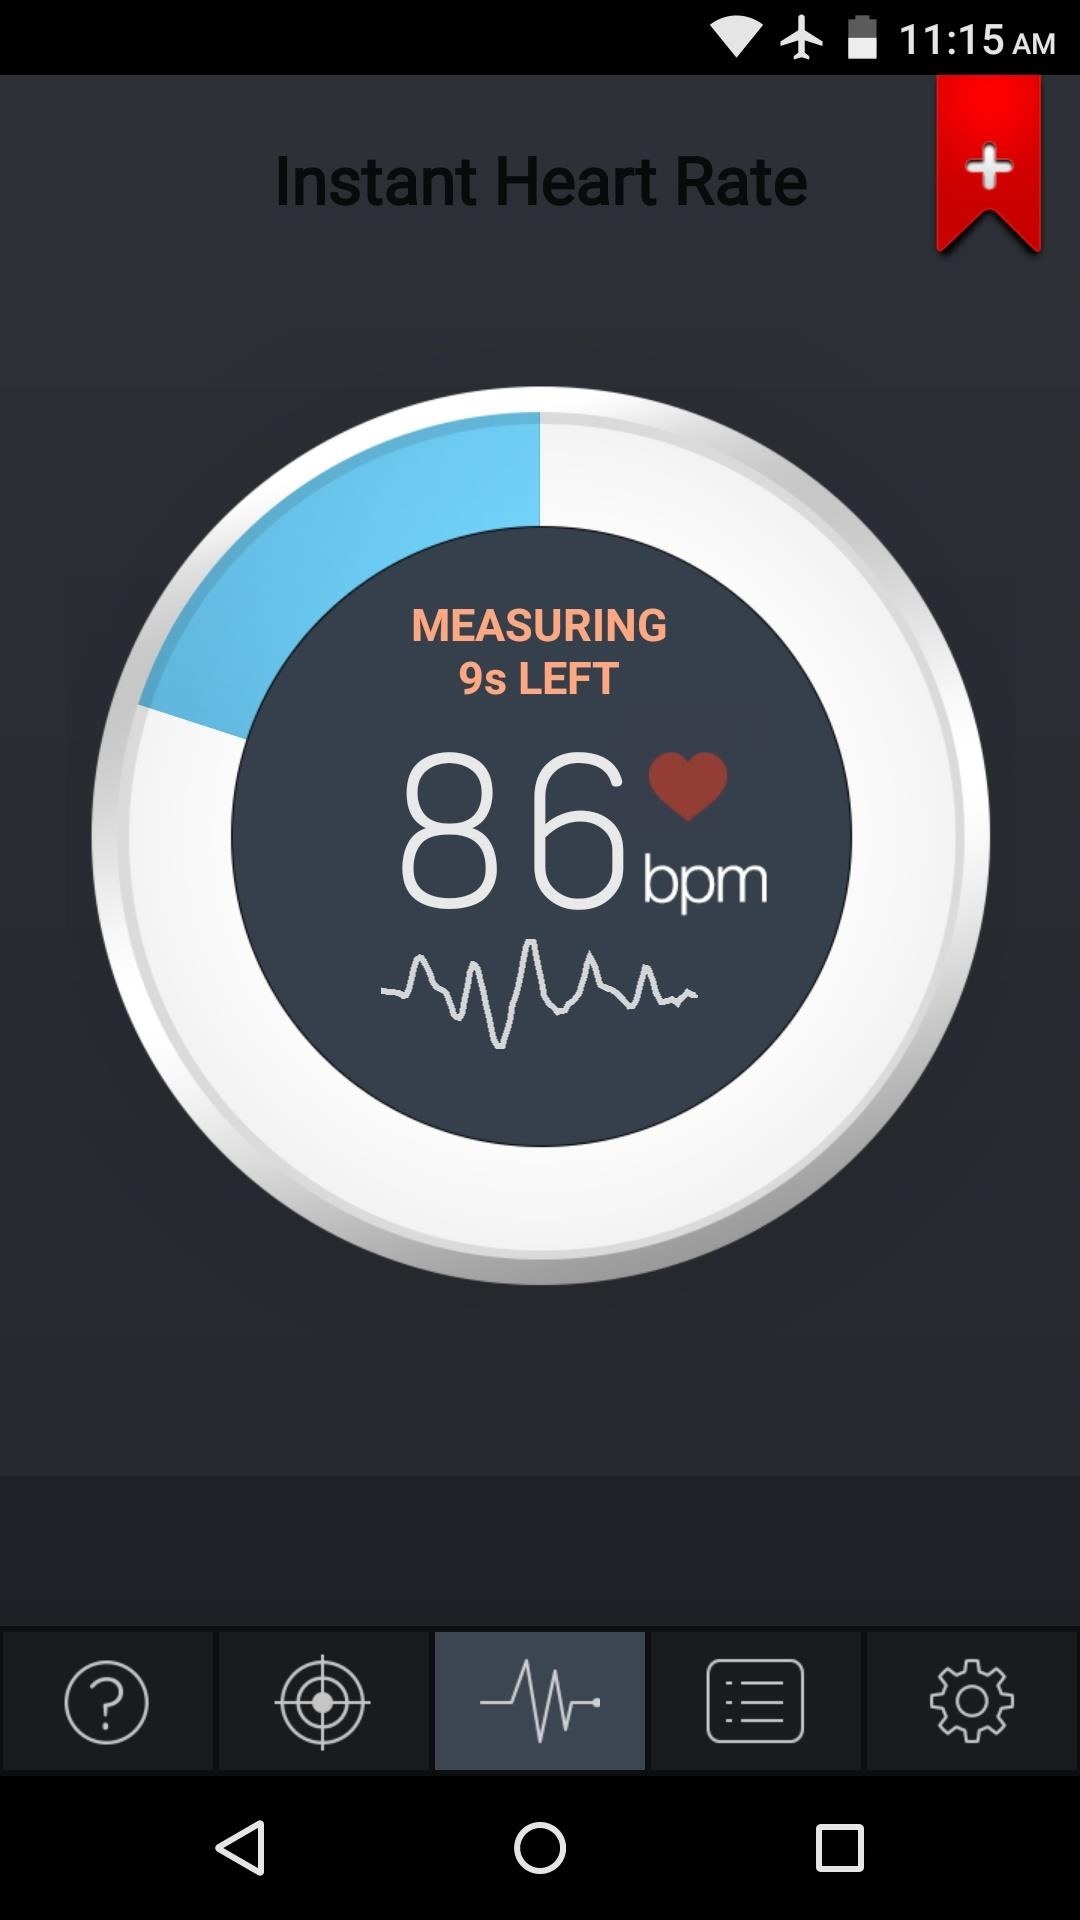 How to Check Your Heart Rate on Any Android Phone